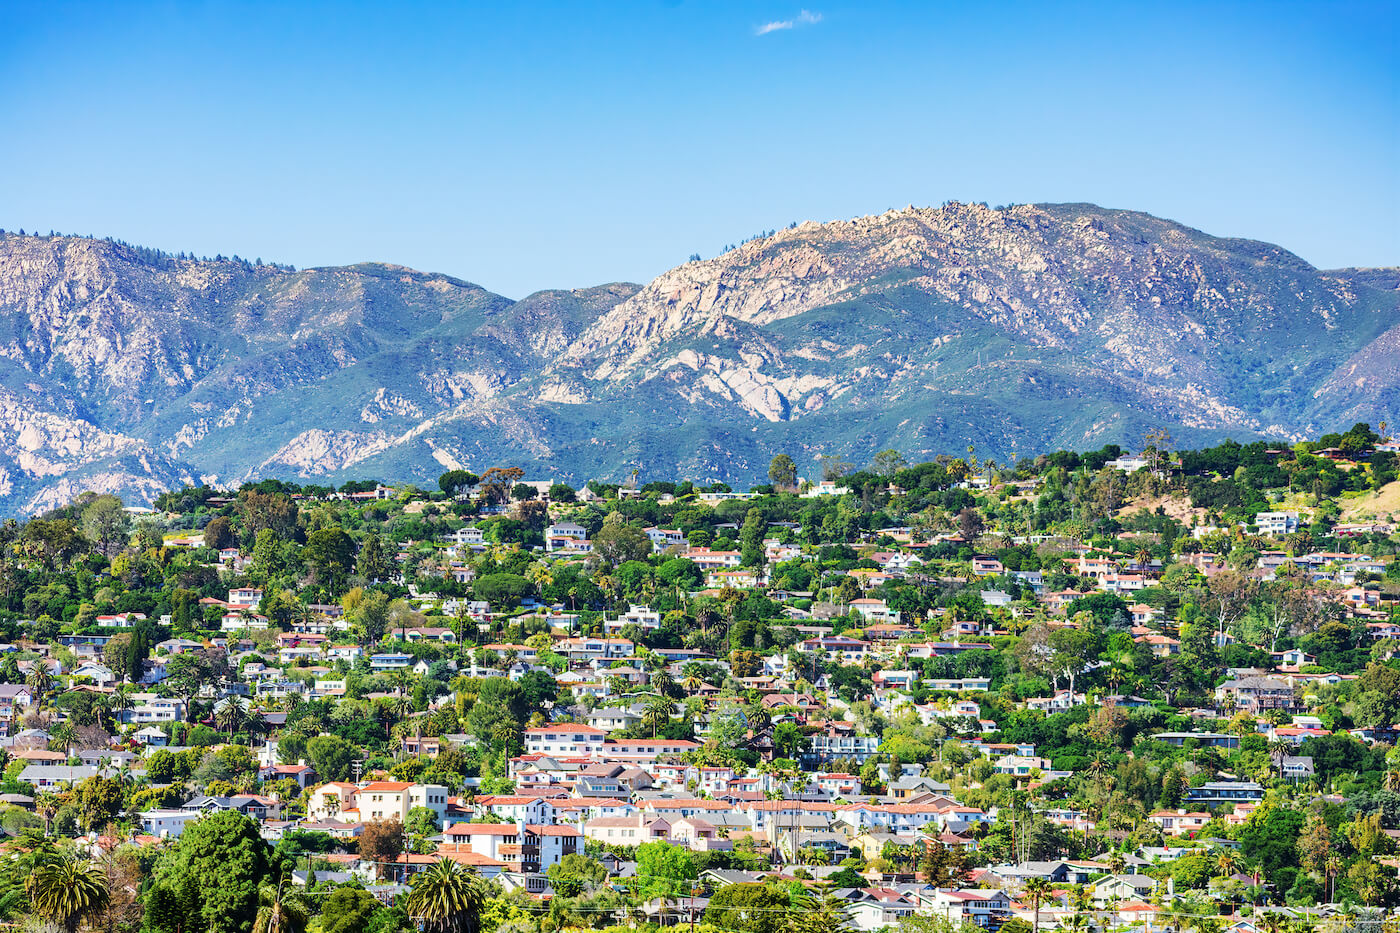 View of houses and mountains in Santa Barbara